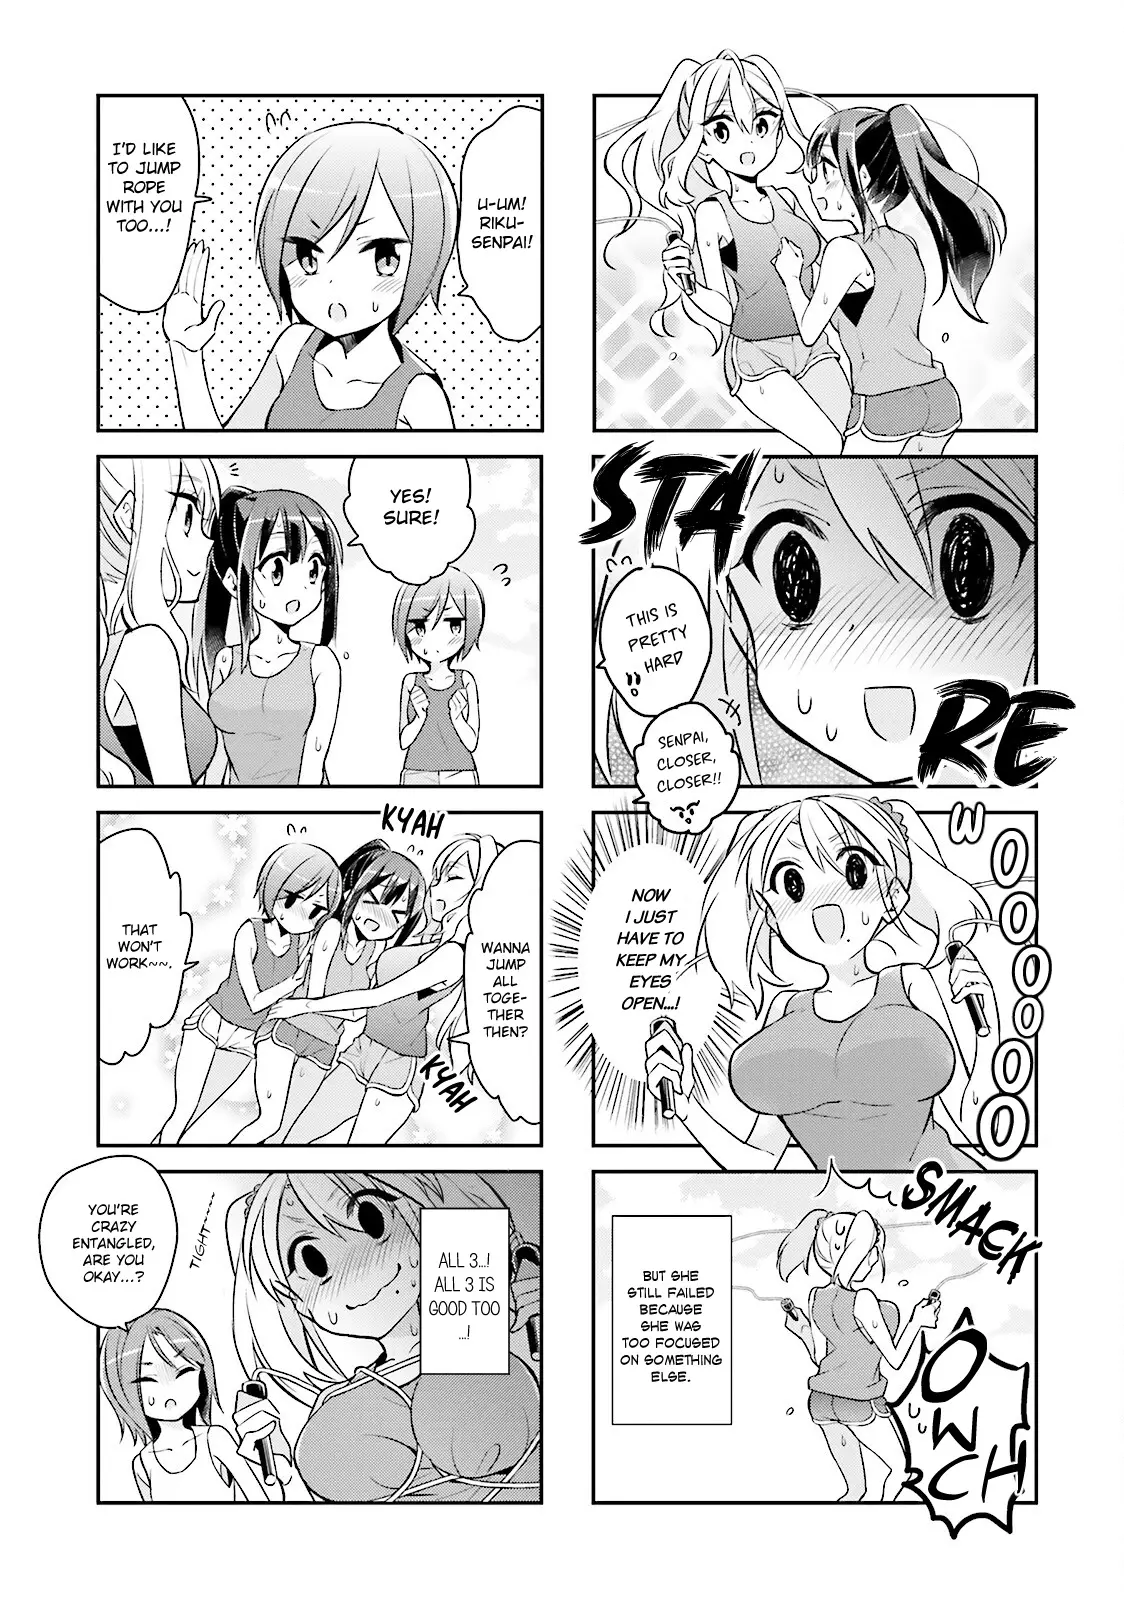 Seishun Sweet Track - 9 page 5-5d4605a5